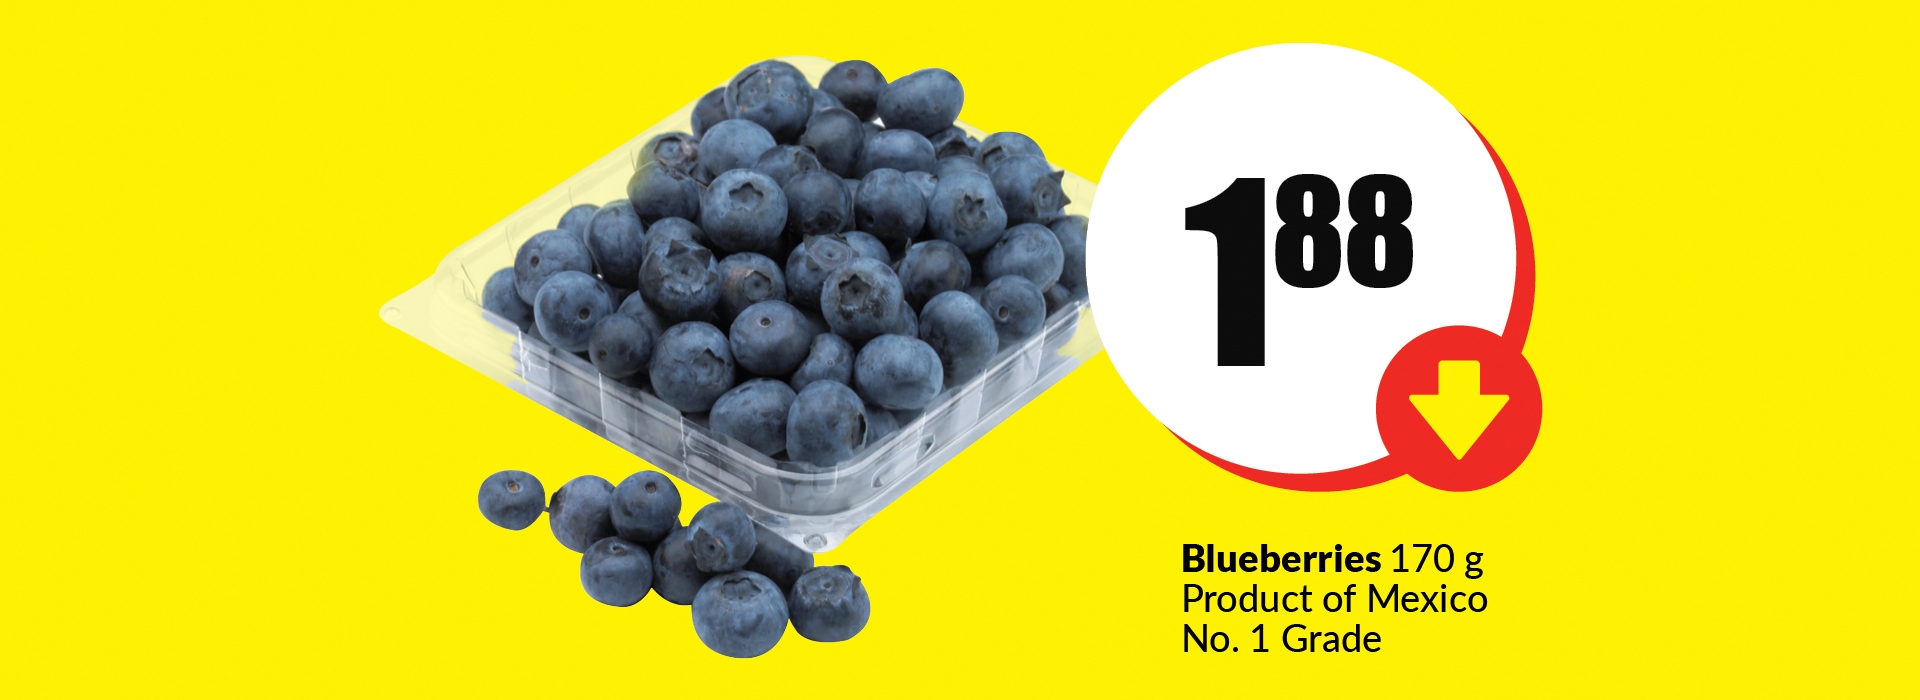 Blueberries product of mexico